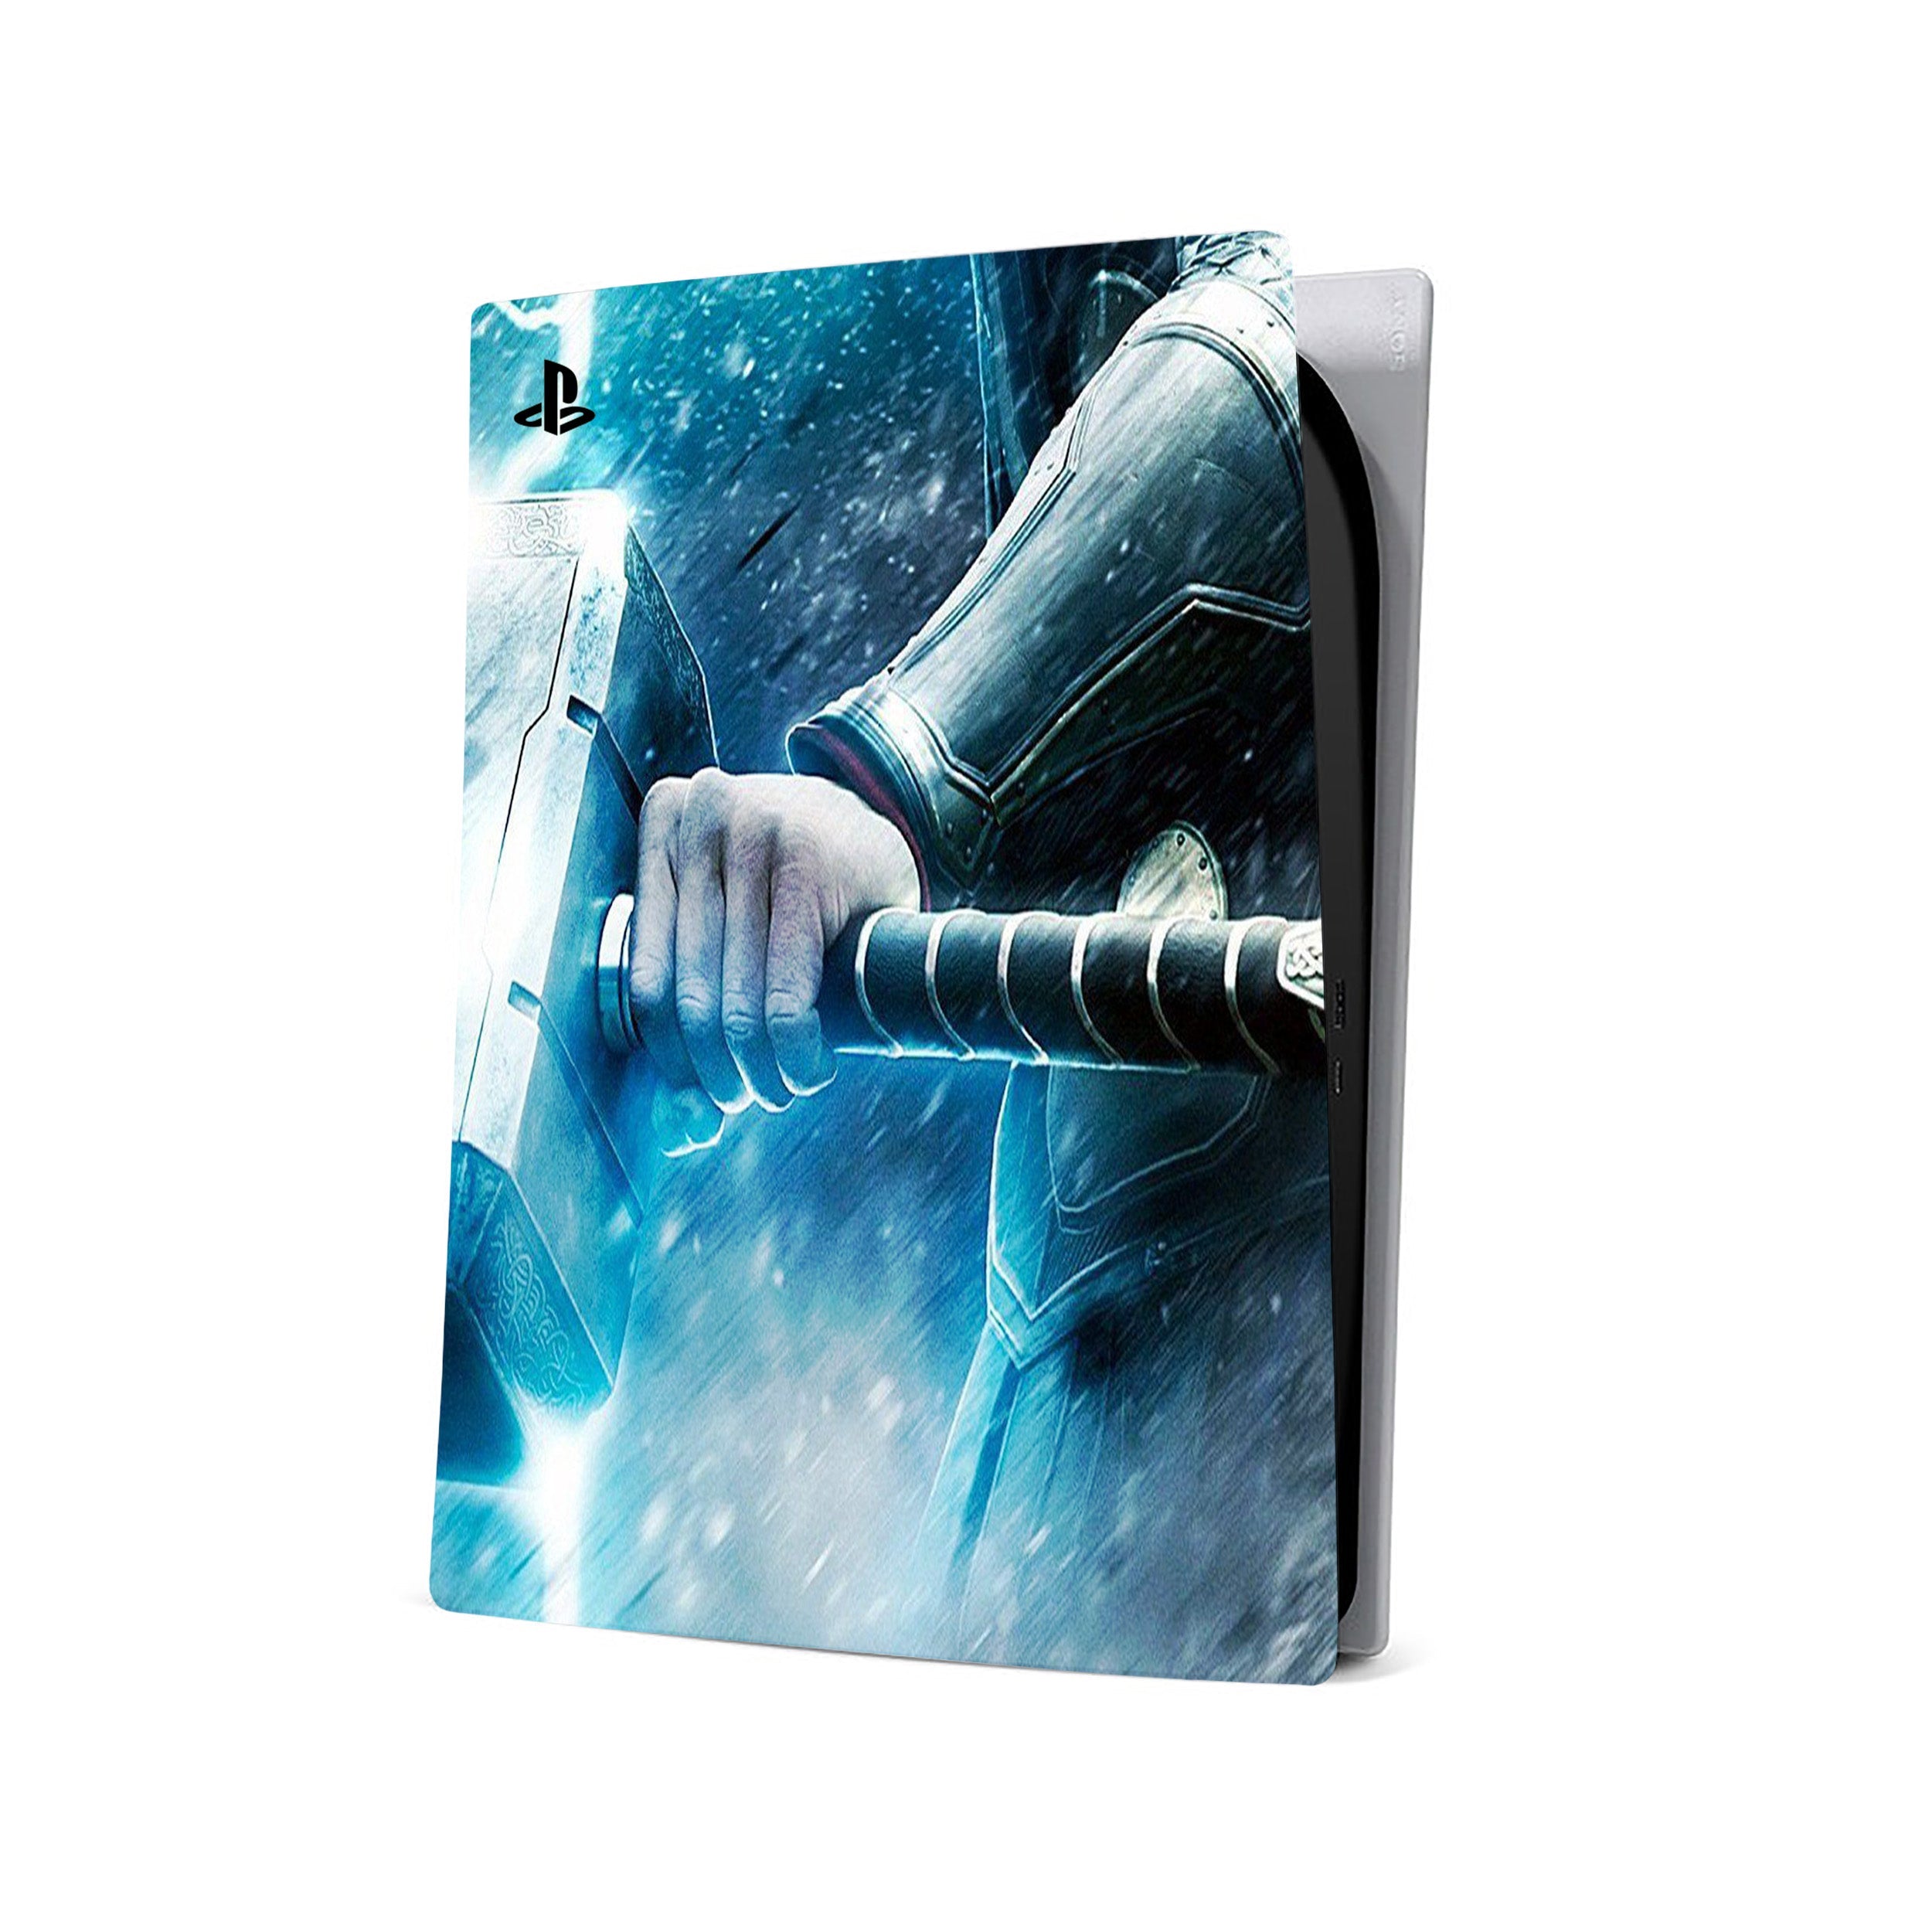 A video game skin featuring a Marvel Thor design for the PS5.